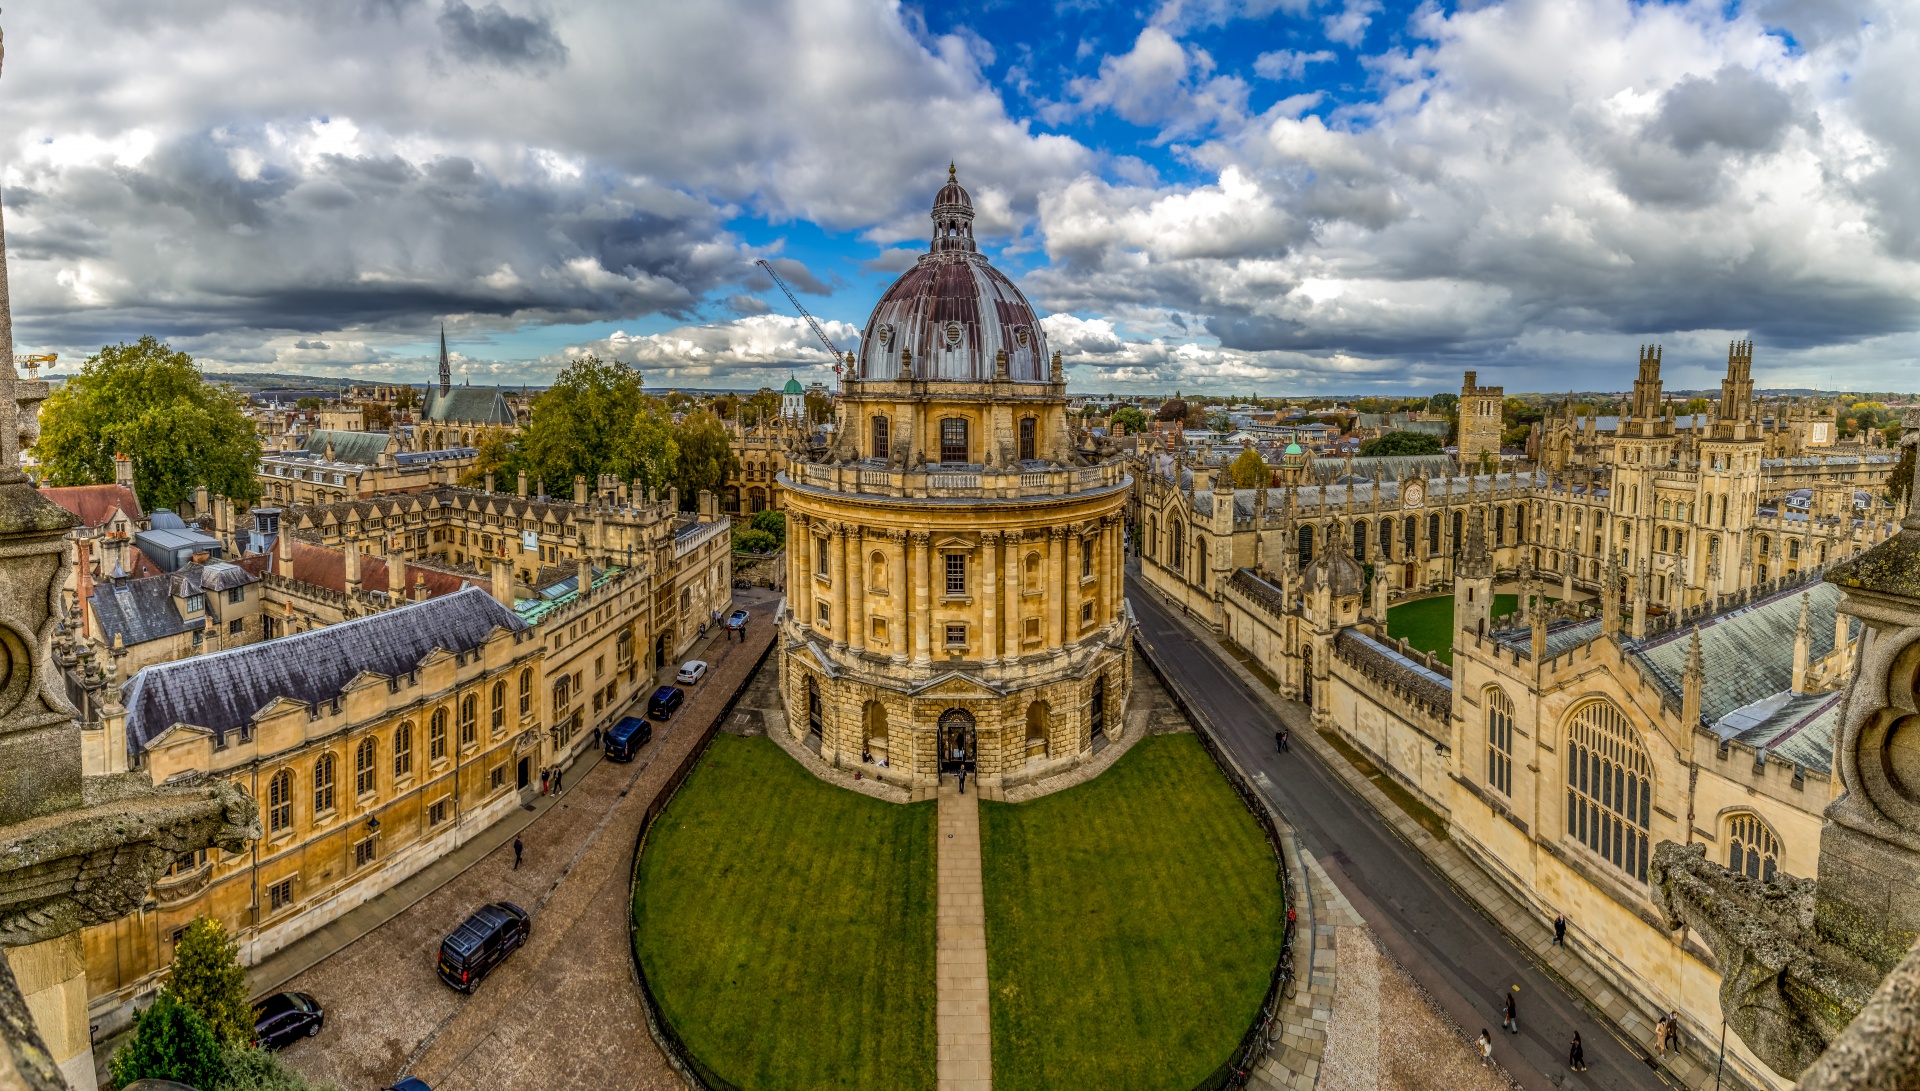 Oxford is a university city in Oxfordshire, England, with a population of 152,450. It is 56 miles northwest of London, 64 miles from Birmingham and 24 miles from Reading by road.